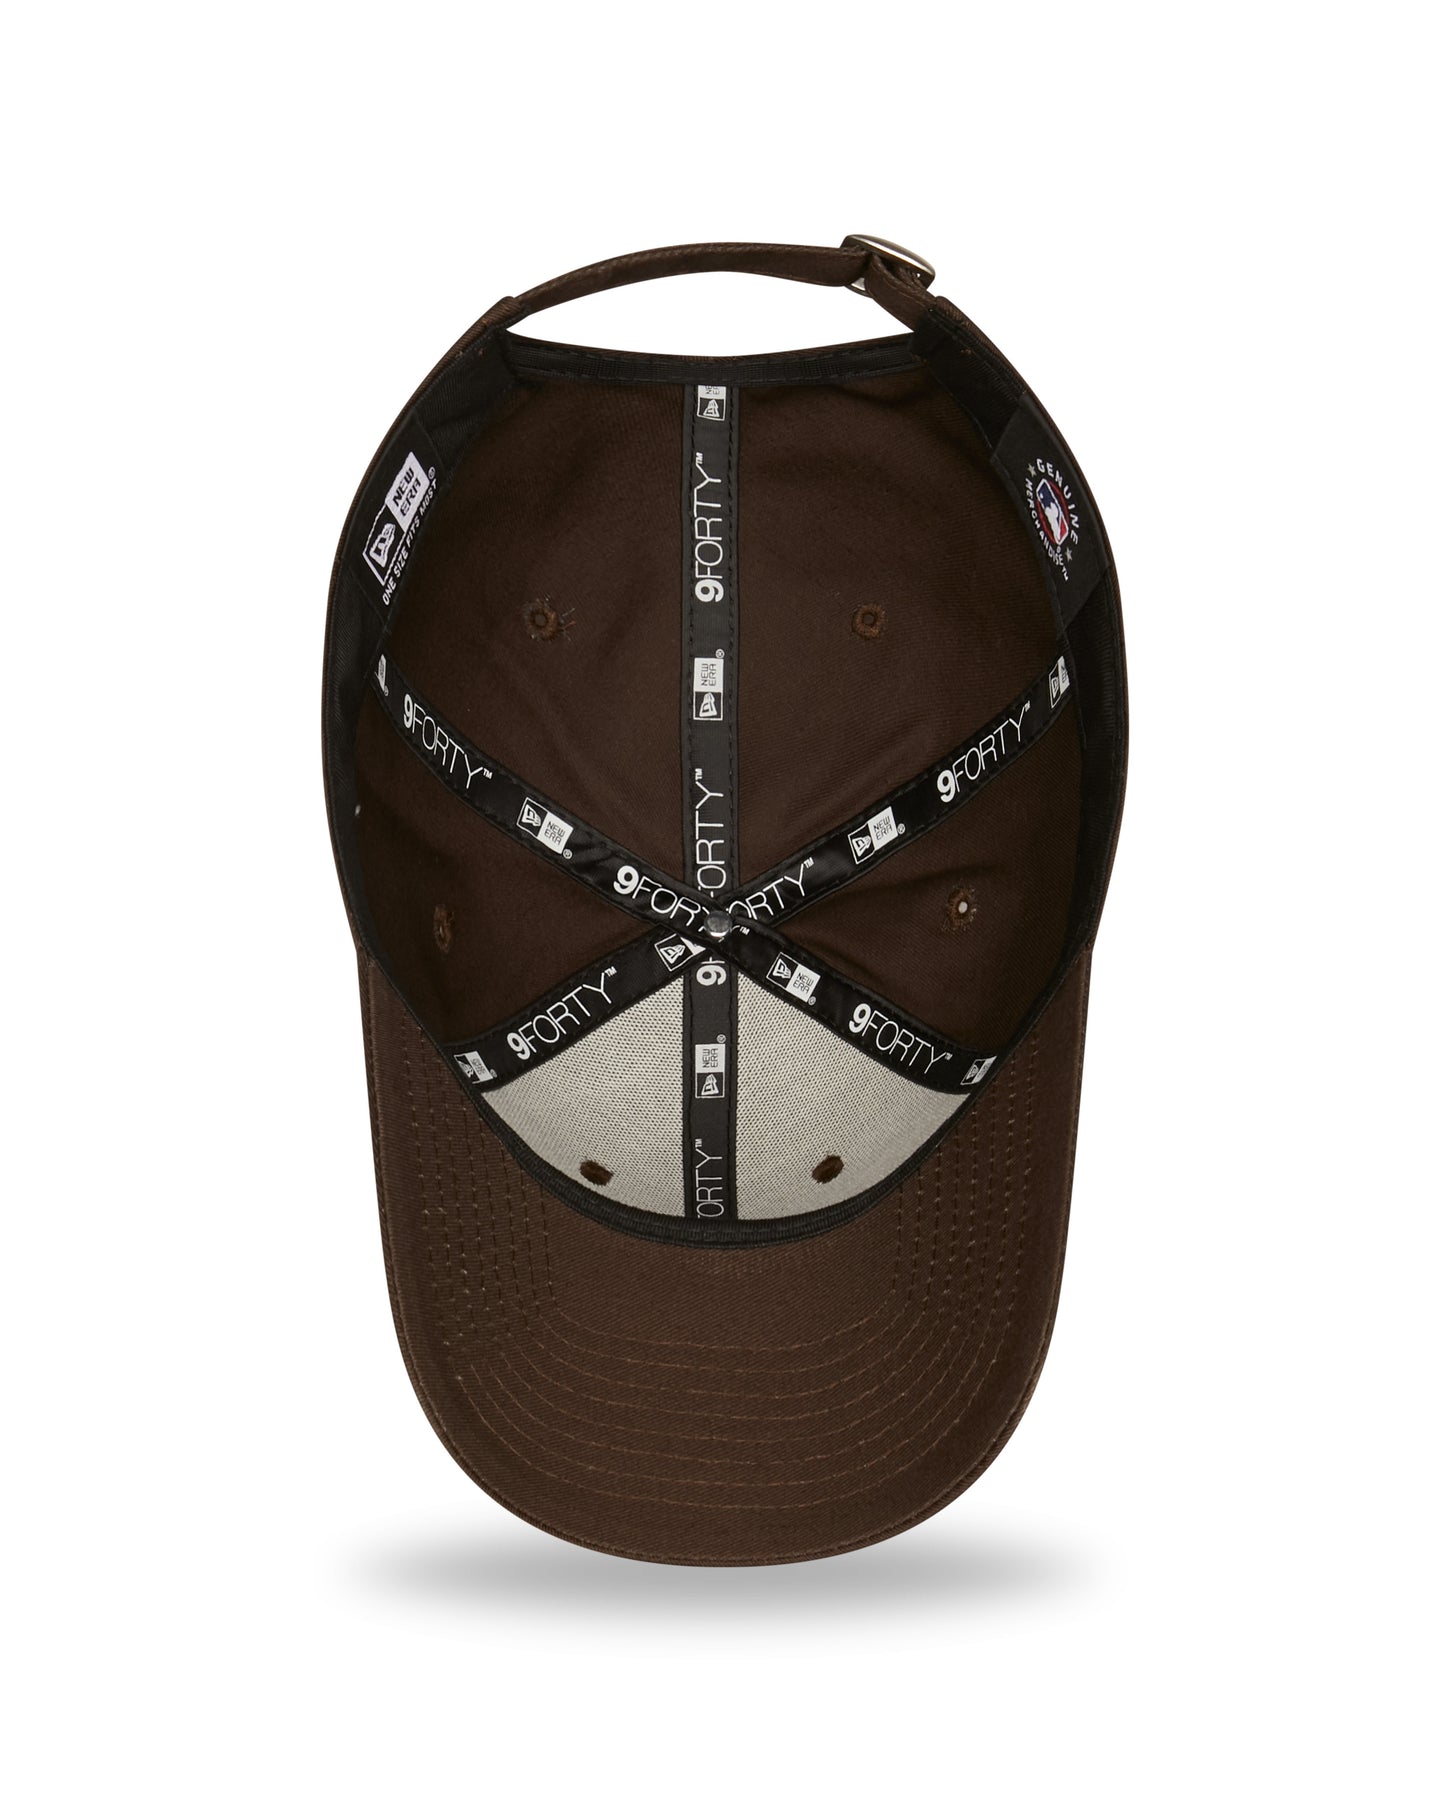 New York Yankees Cap 9Forty League Essentials - Brown/Stone